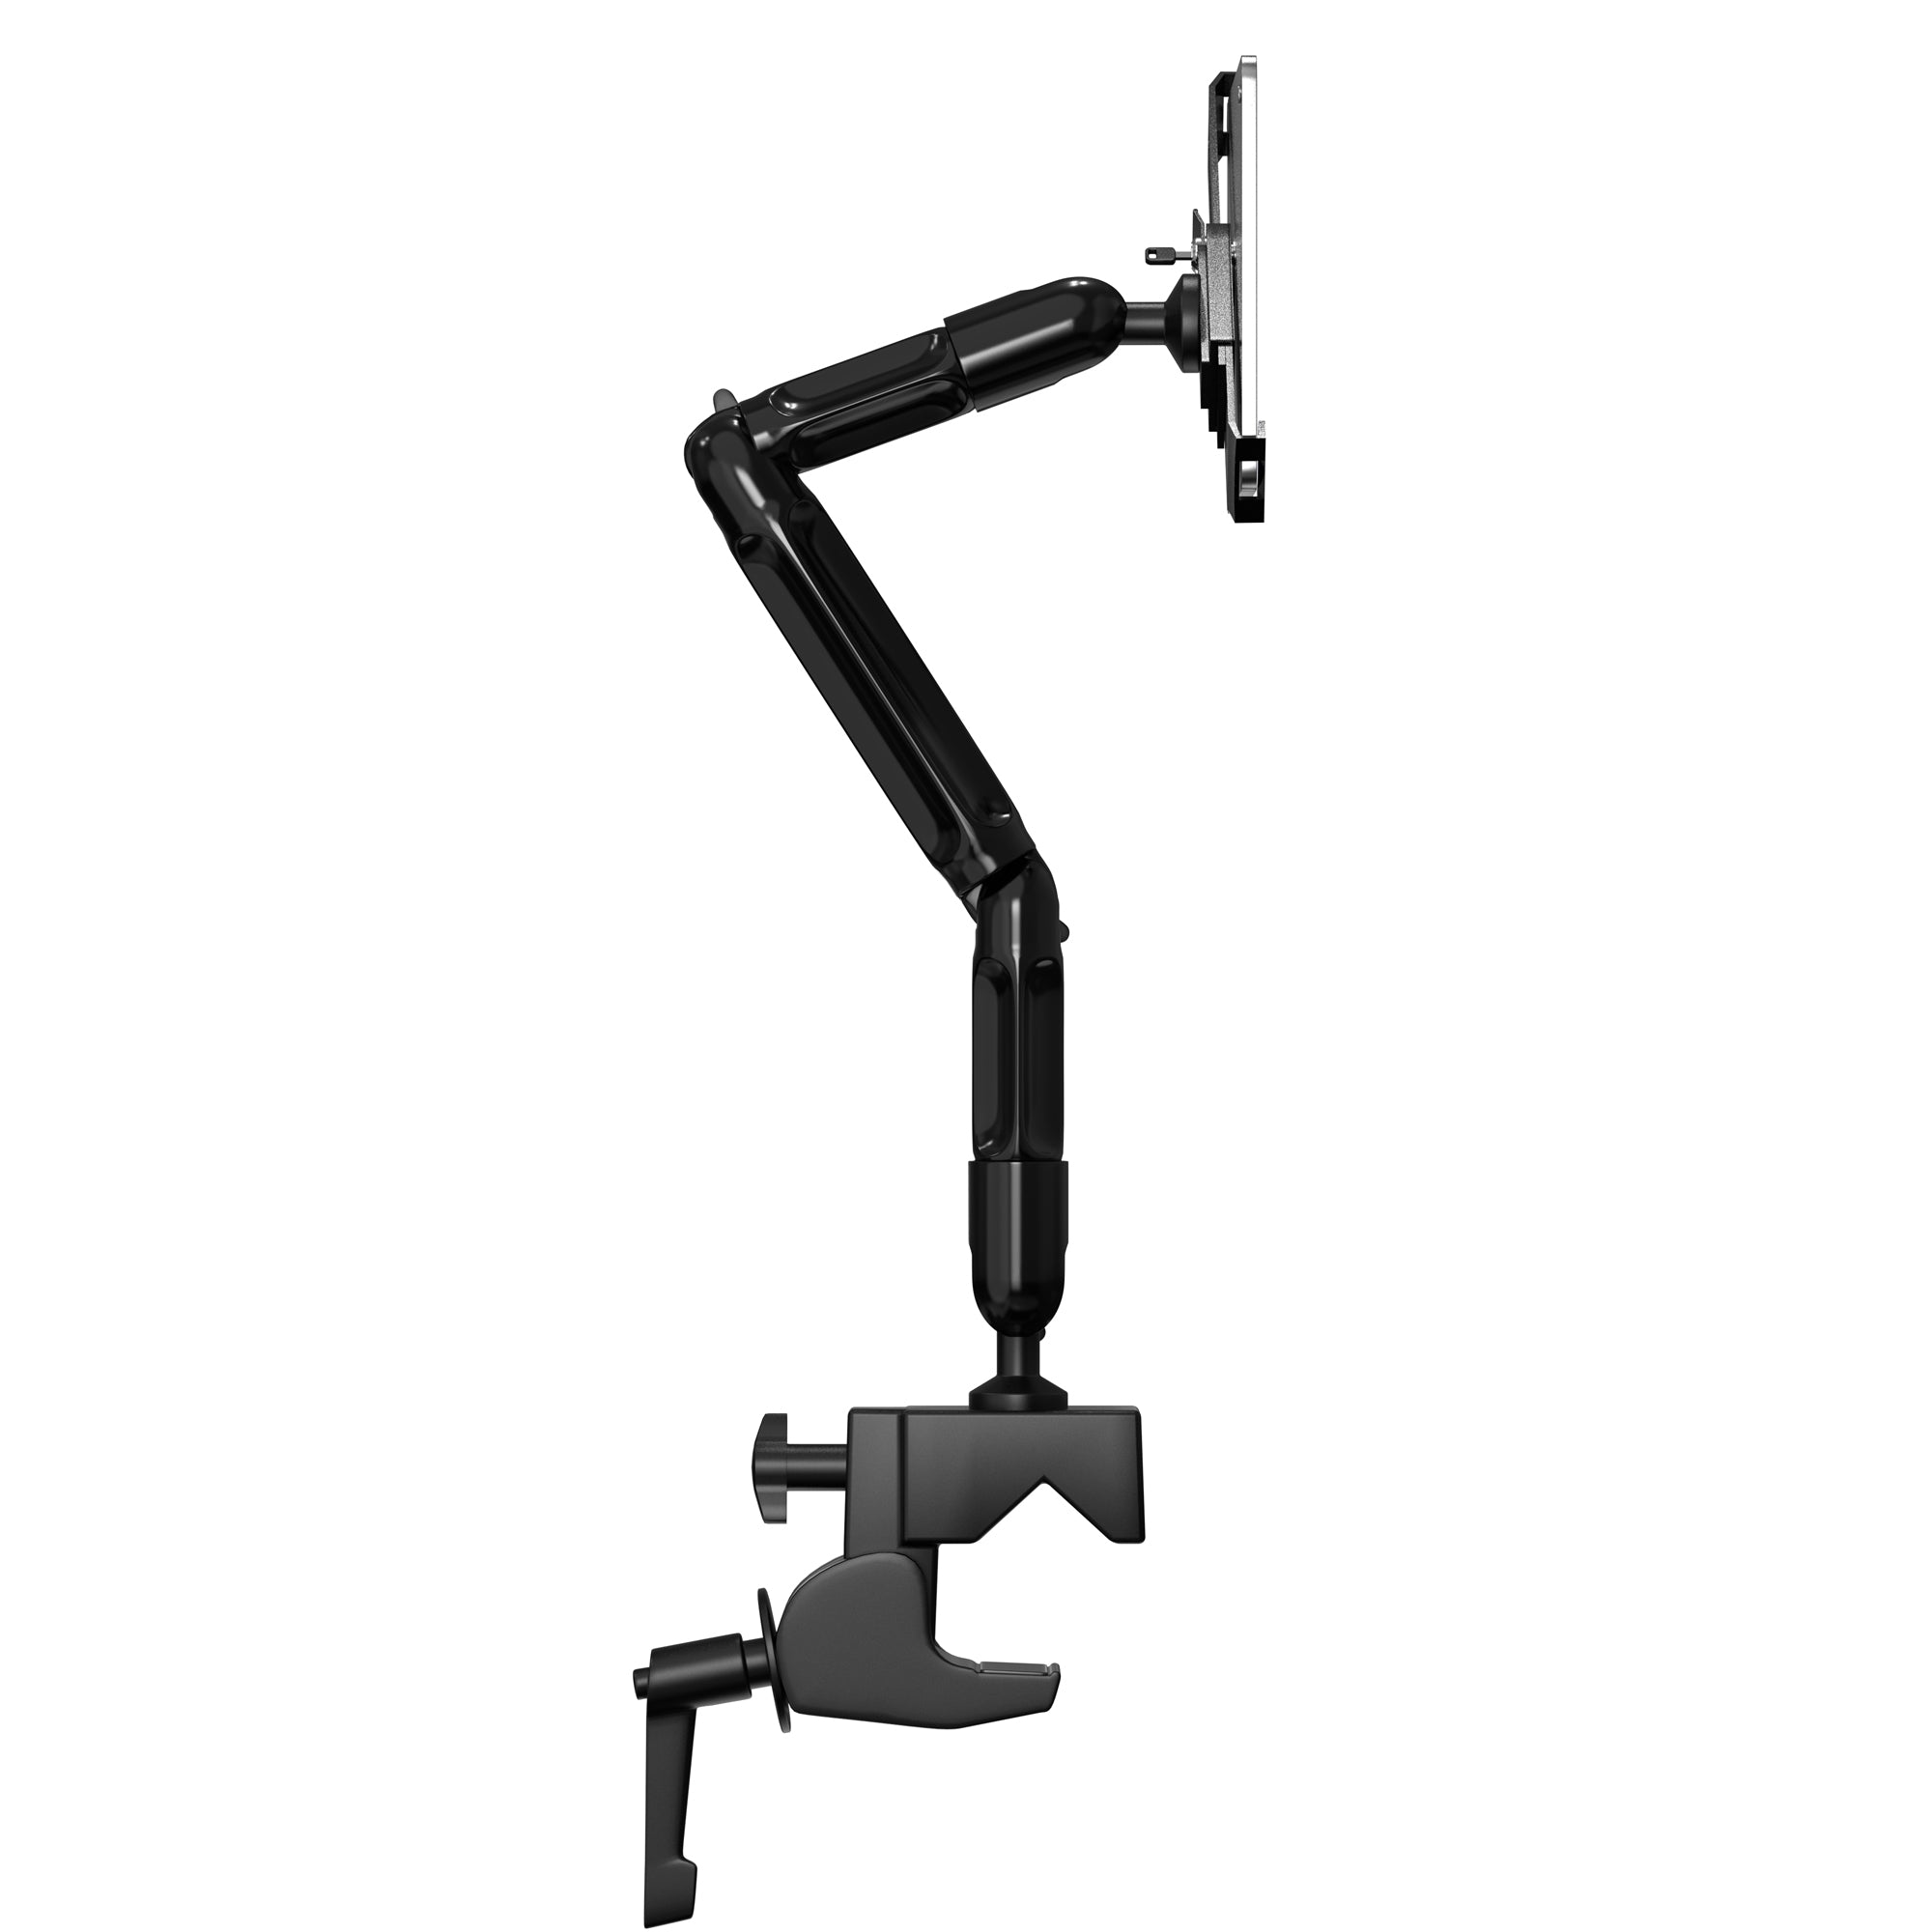 Custom Flex Security Desk Clamp Mount for 7-14 Inch Tablets, including iPad 10.2-inch (7th/ 8th/ 9th Generation)